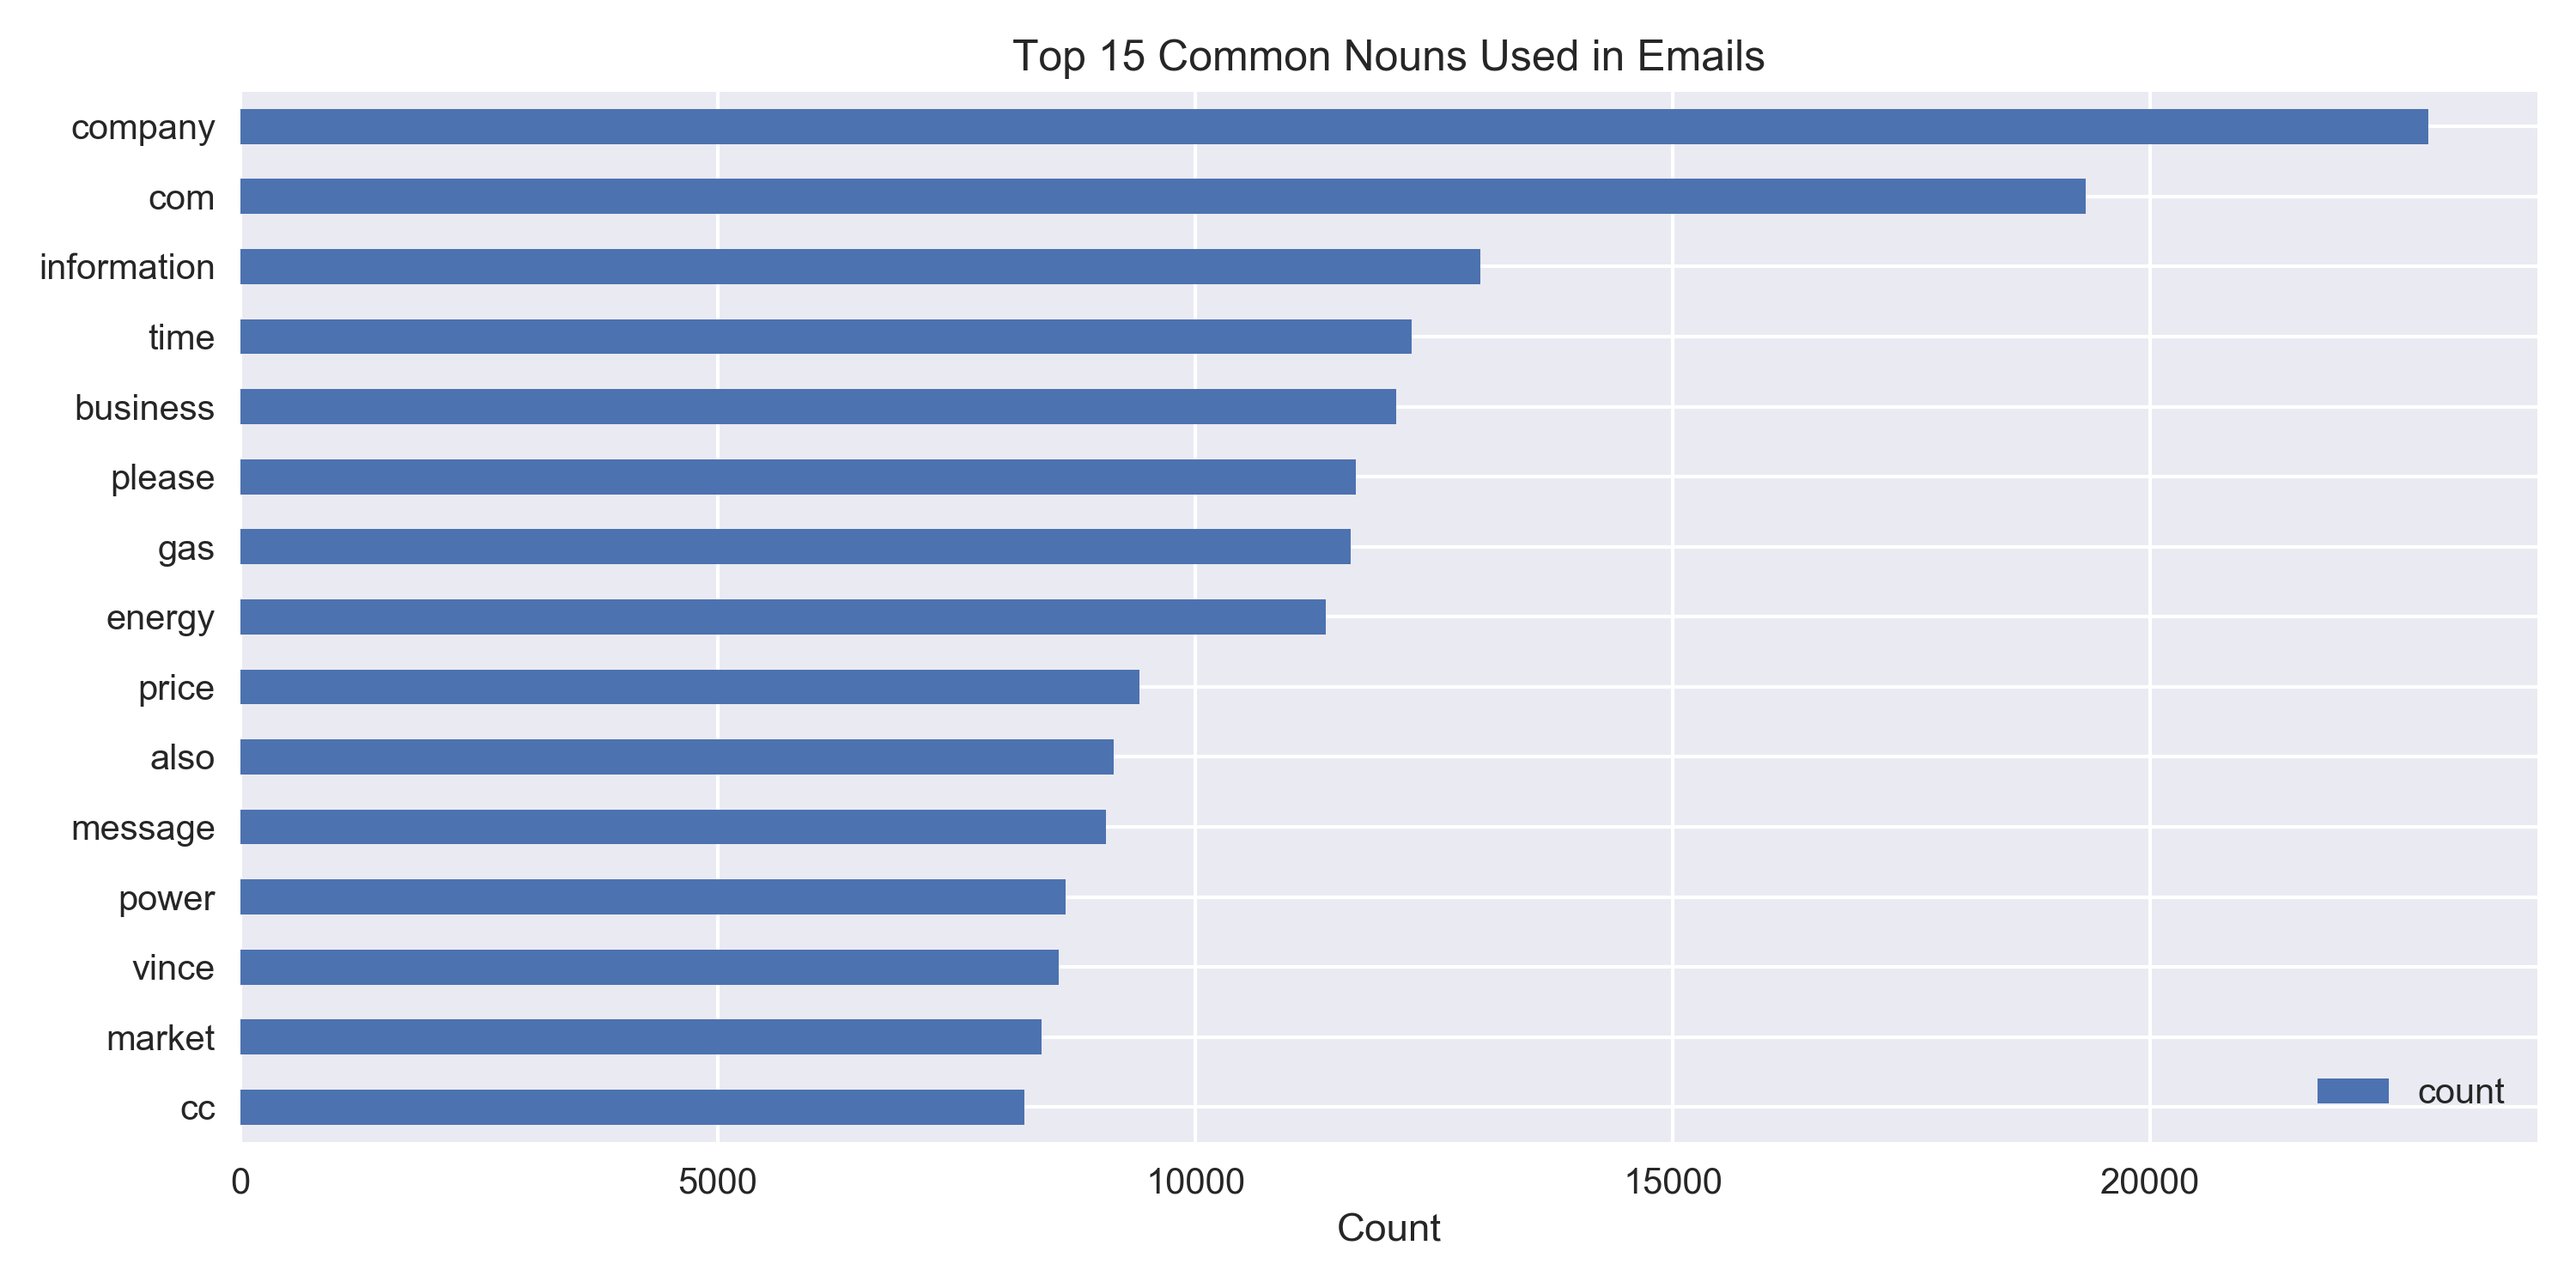 Top 15 Common Nouns Used in Emails